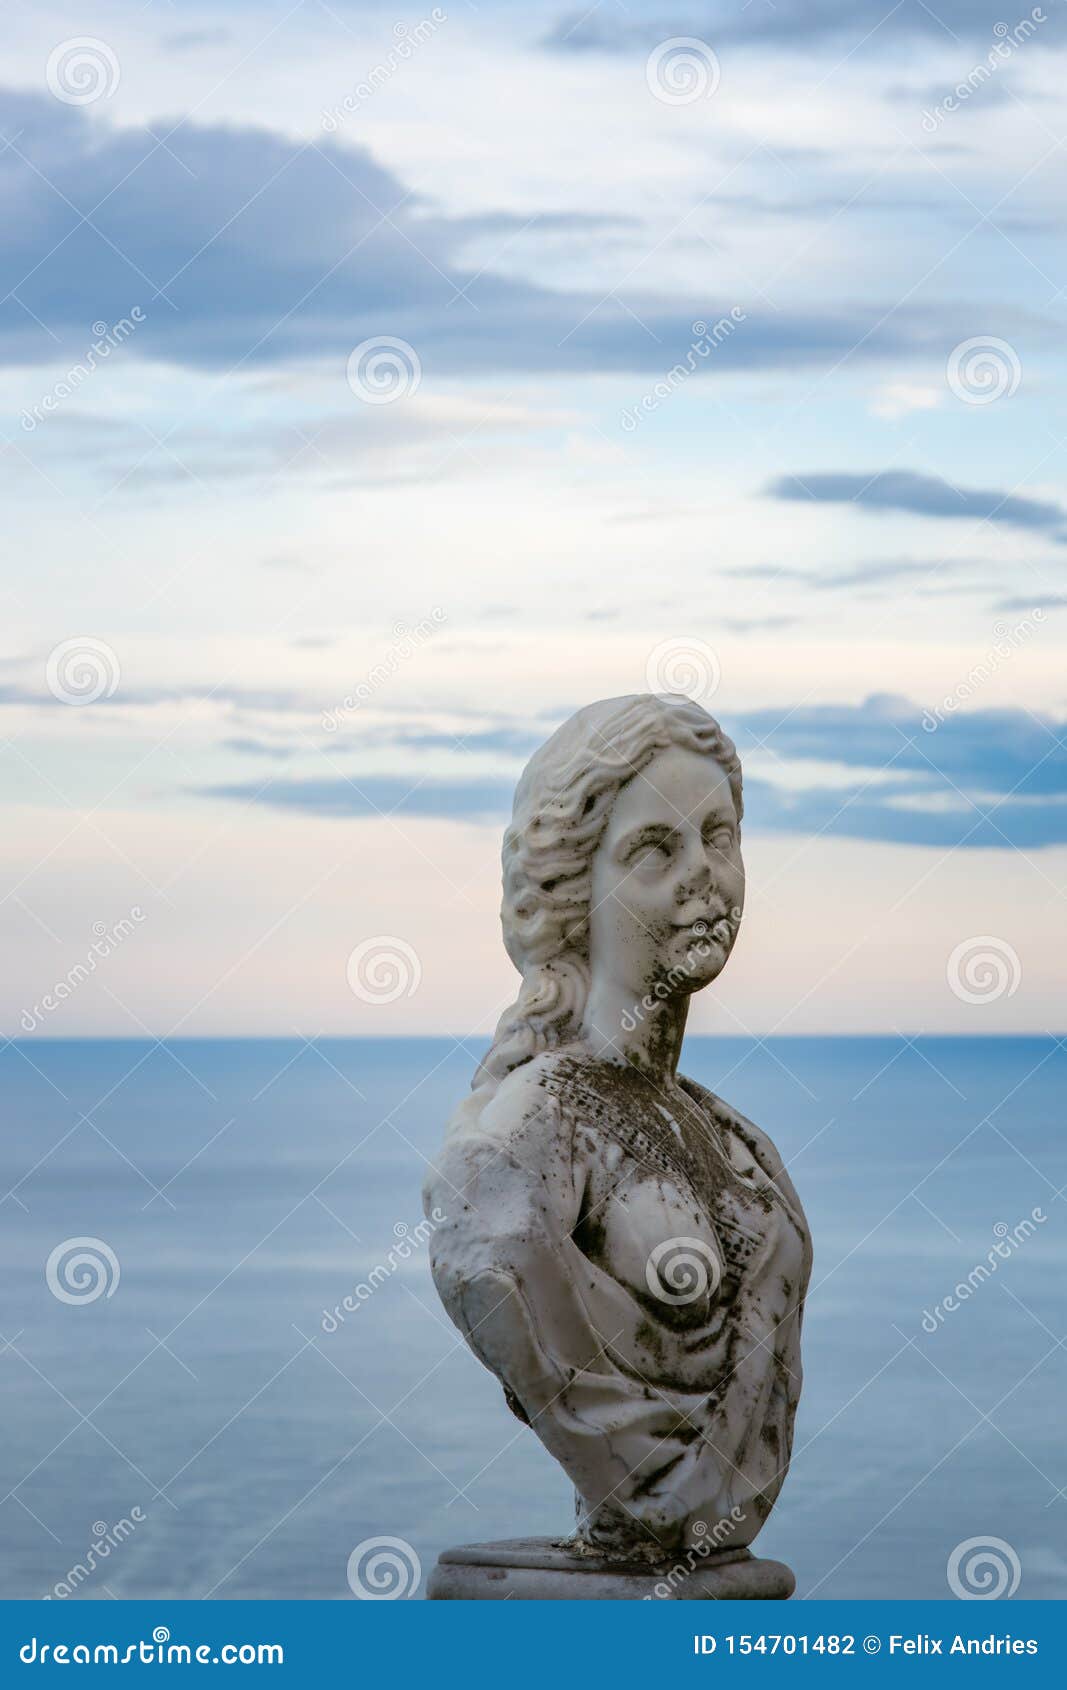 women statue from the belvedere, the so-called terrazza dell`infinito, the terrace of infinity seen on the sunset, villa cimbrone,